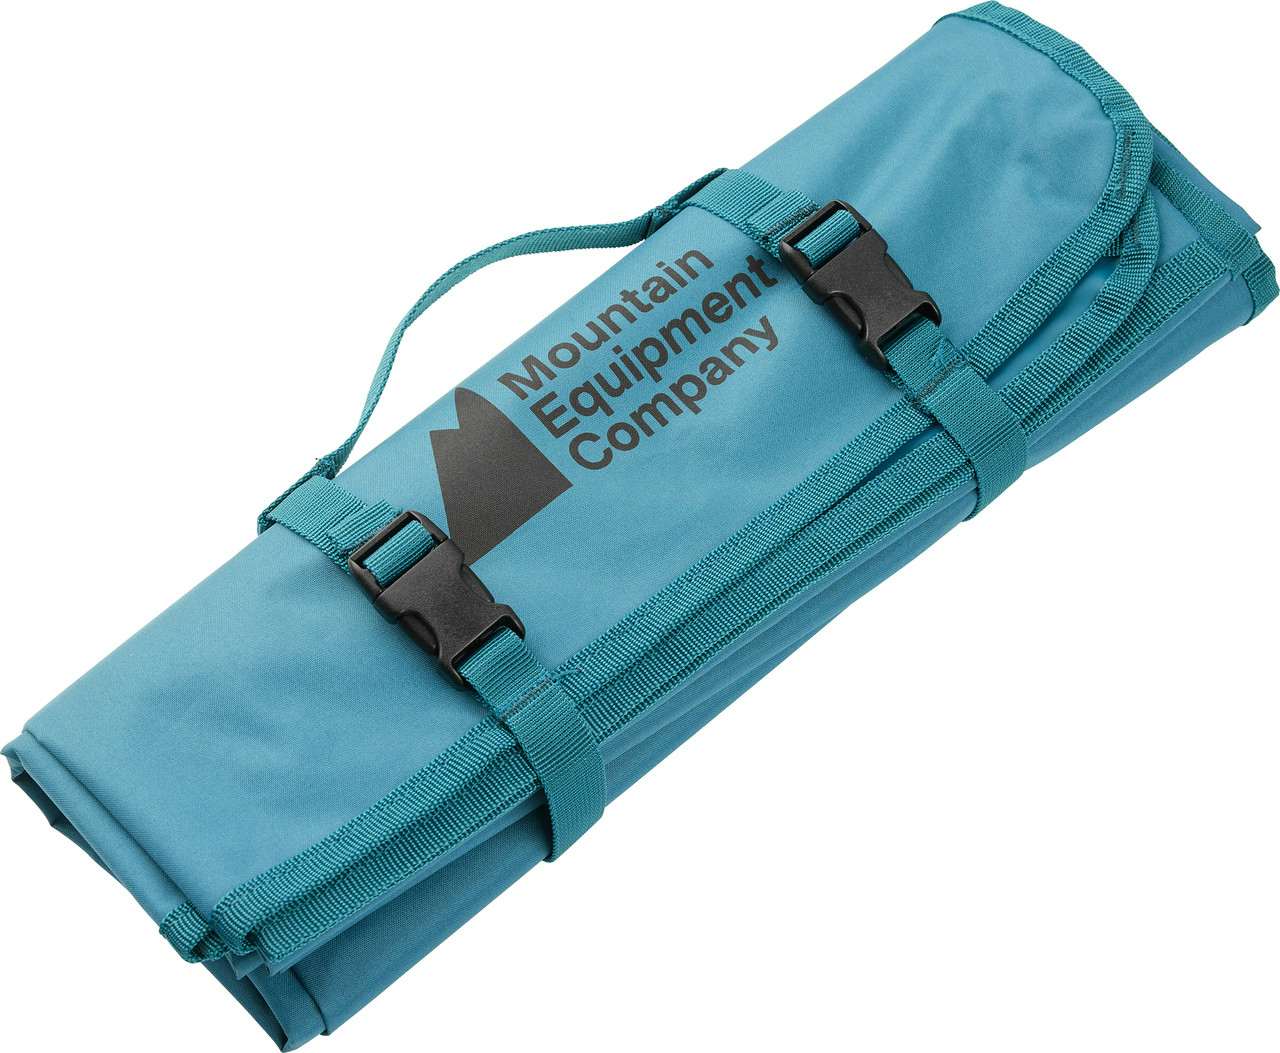 Base Camp Tablecloth and Picnic Ground Sheet Blue Suede